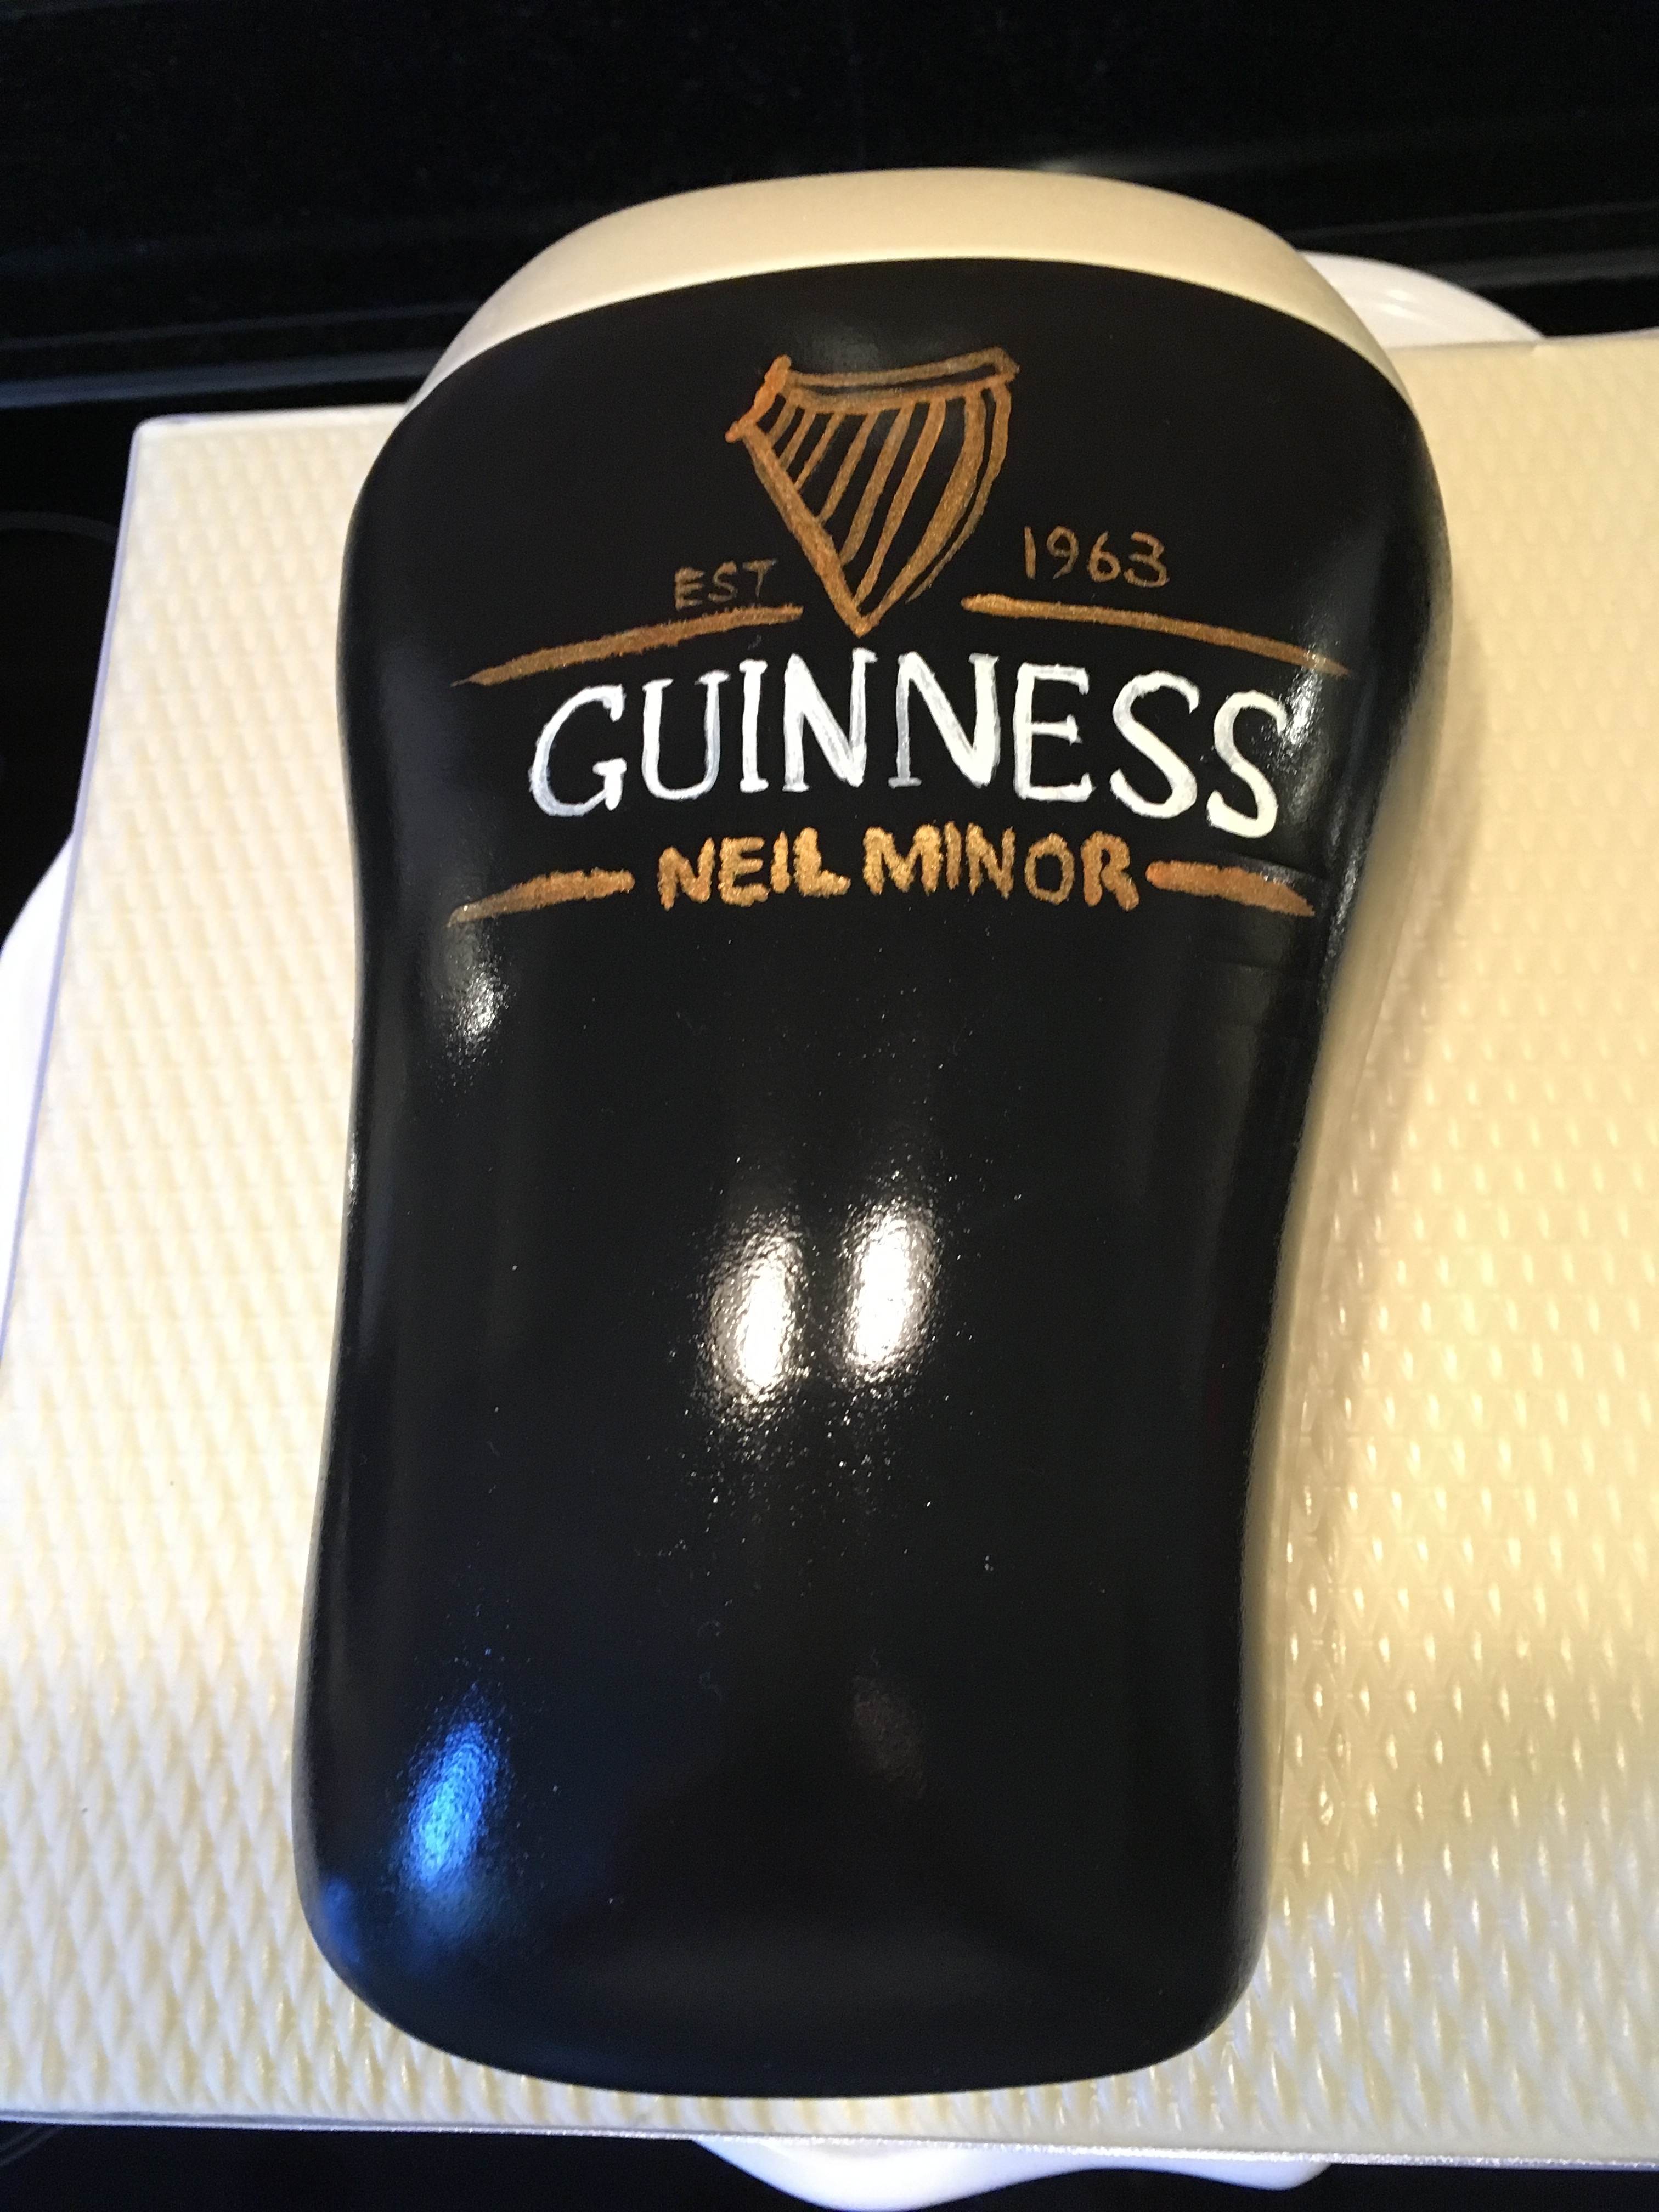 Guiness glass